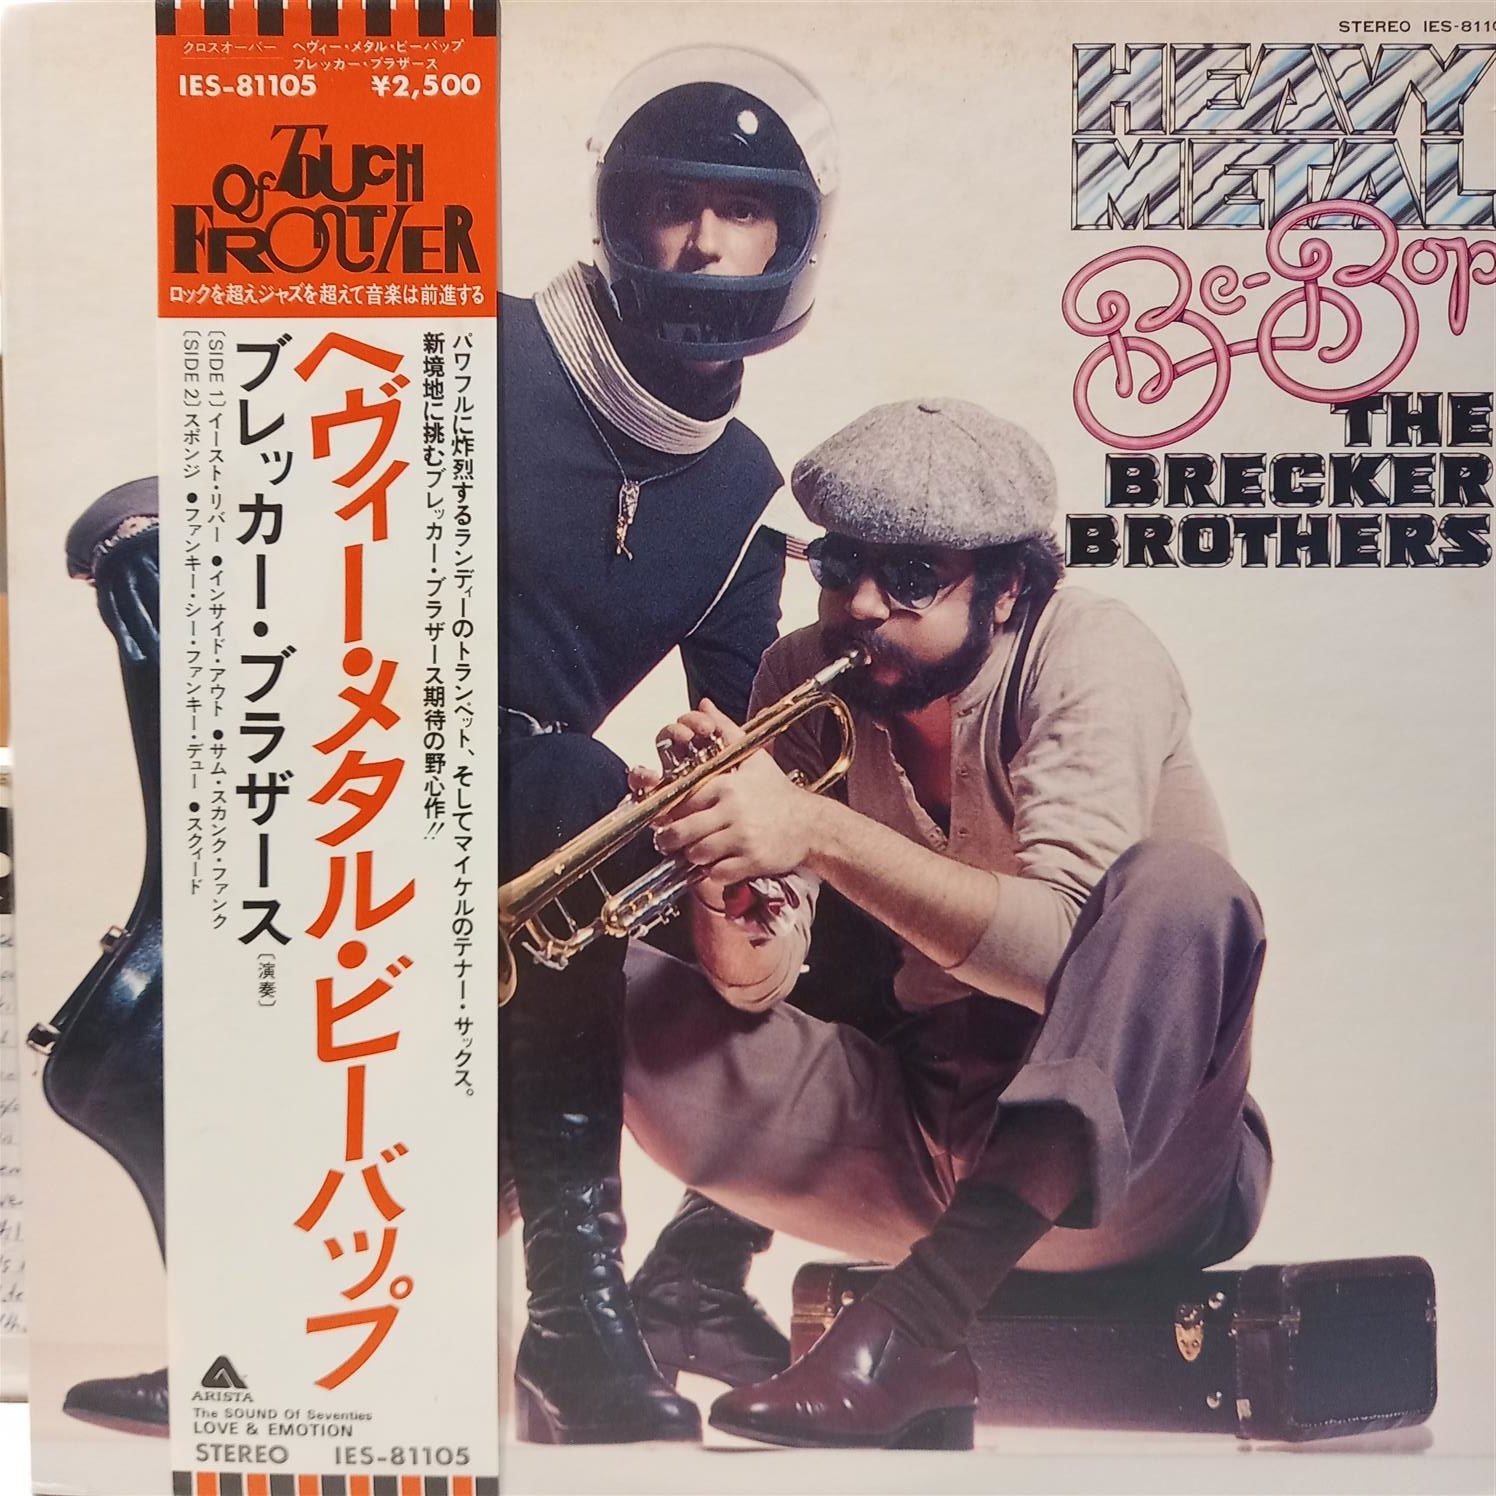 THE BRECKER BROTHERS – HEAVY METAL BE-BOP ON